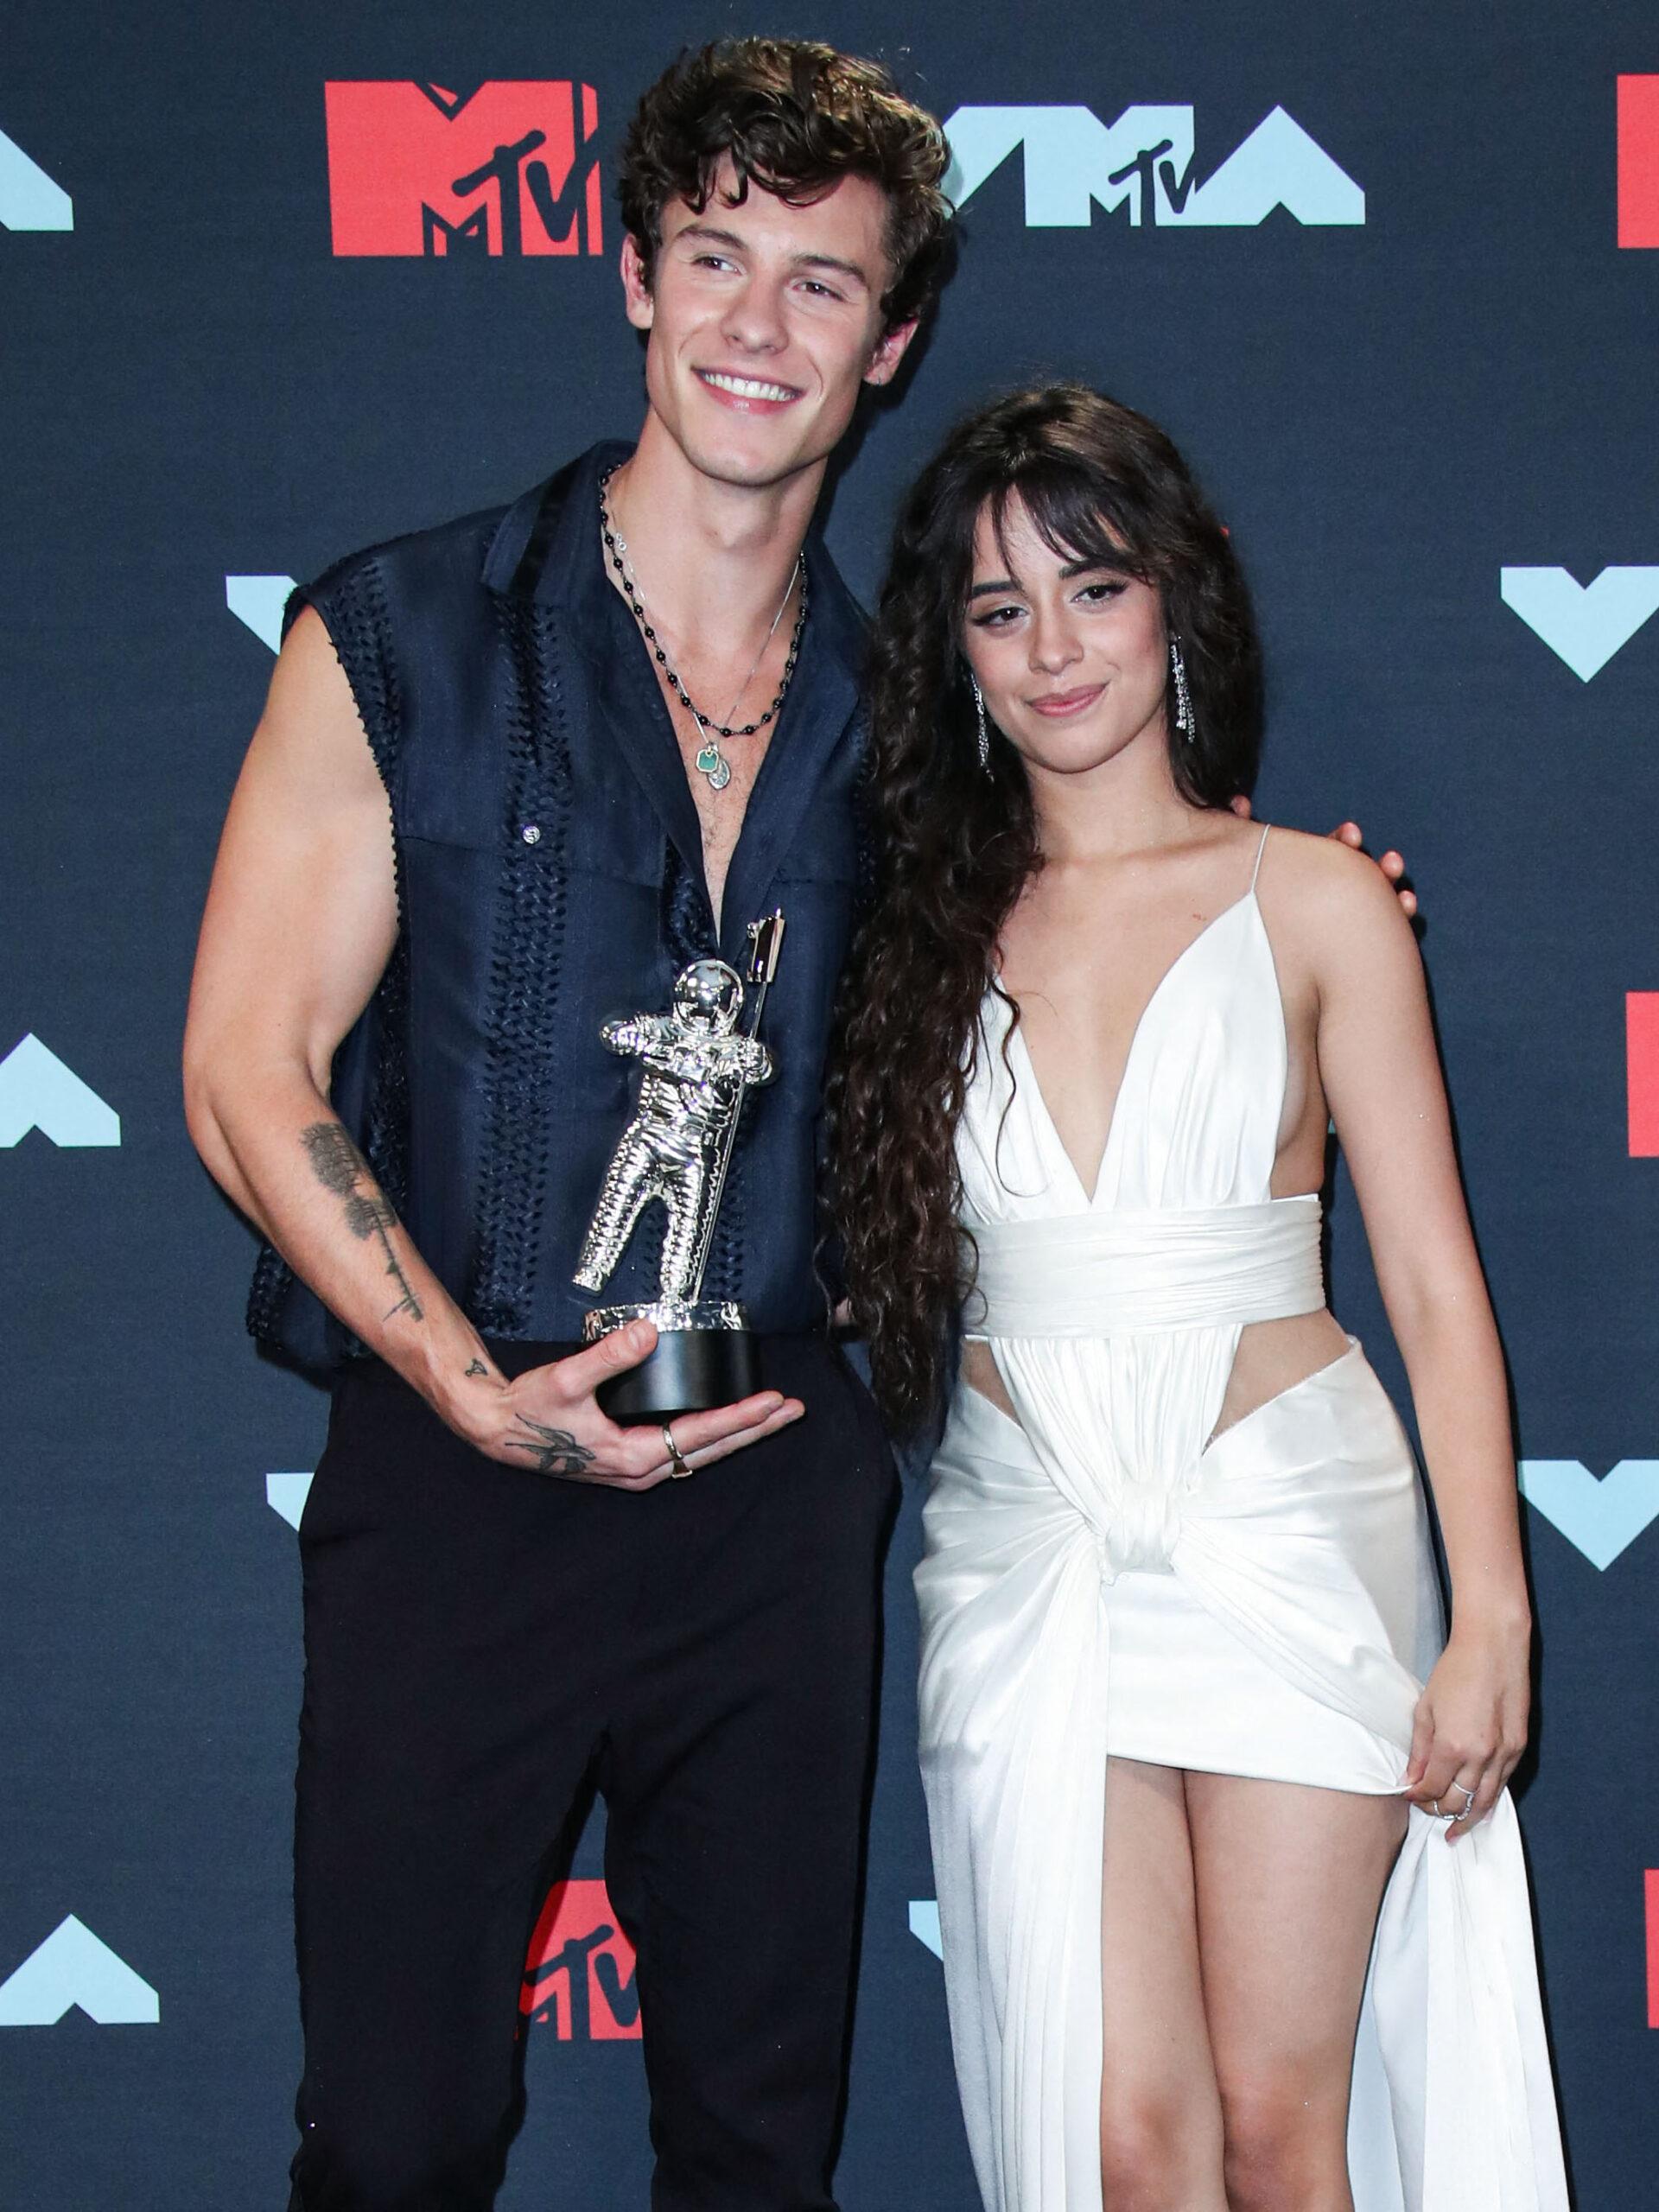 Camila Cabello & Shawn Mendes at the 2019 MTV Video Music Awards held at the Prudential Center